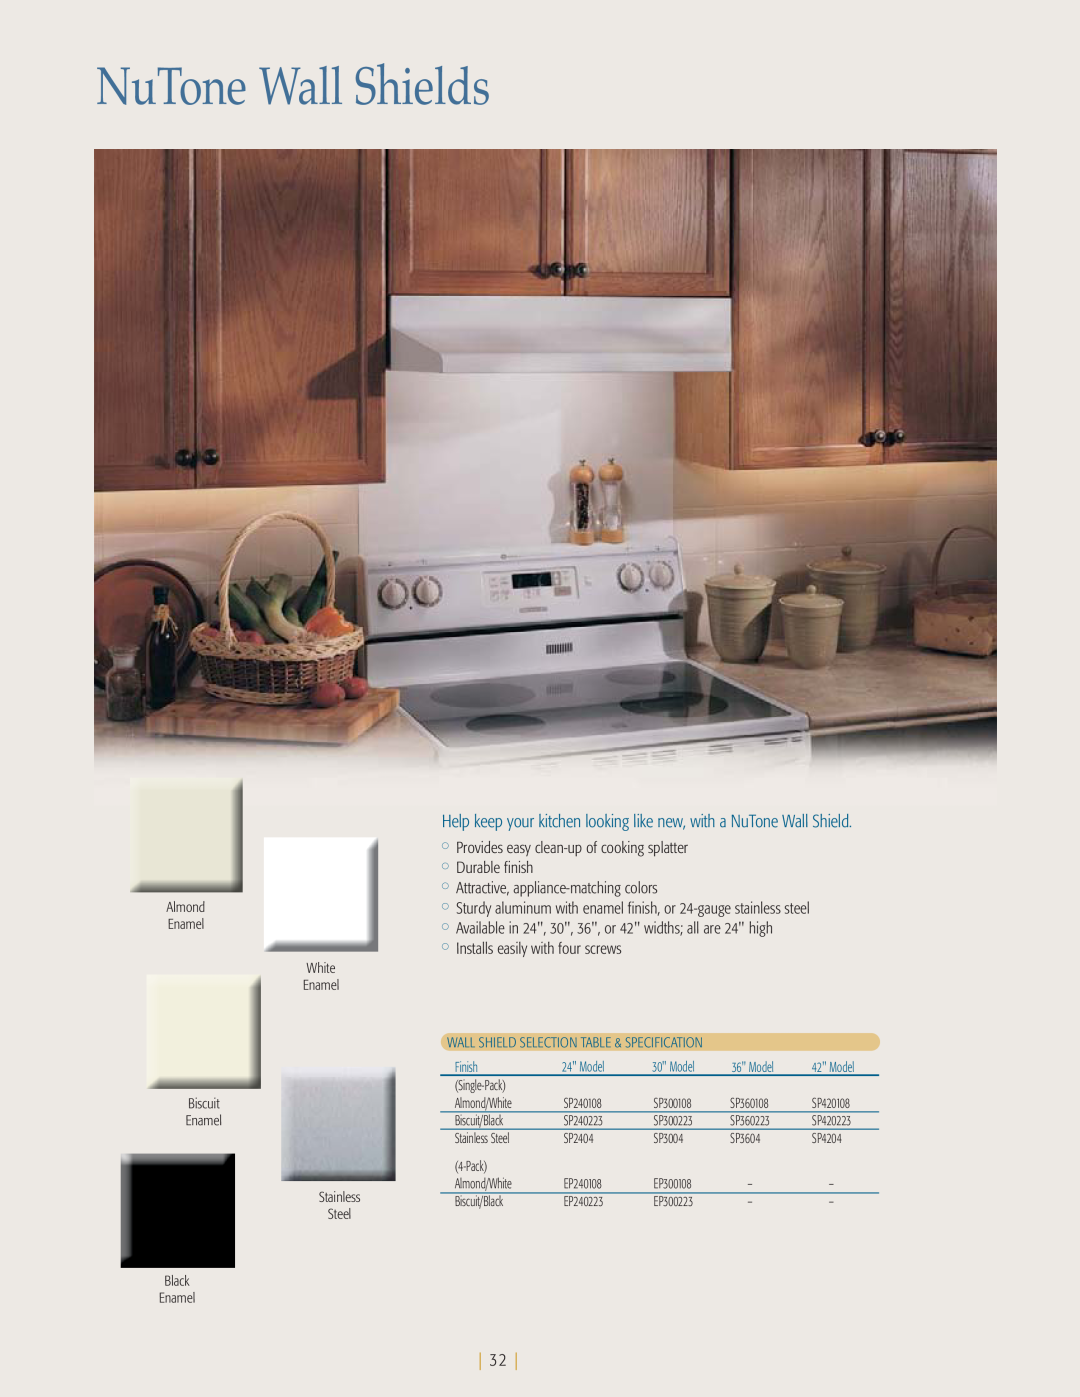 NuTone kitchen ventilation manual NuTone Wall Shields, Help keep your kitchen looking like new, with a NuTone Wall Shield 